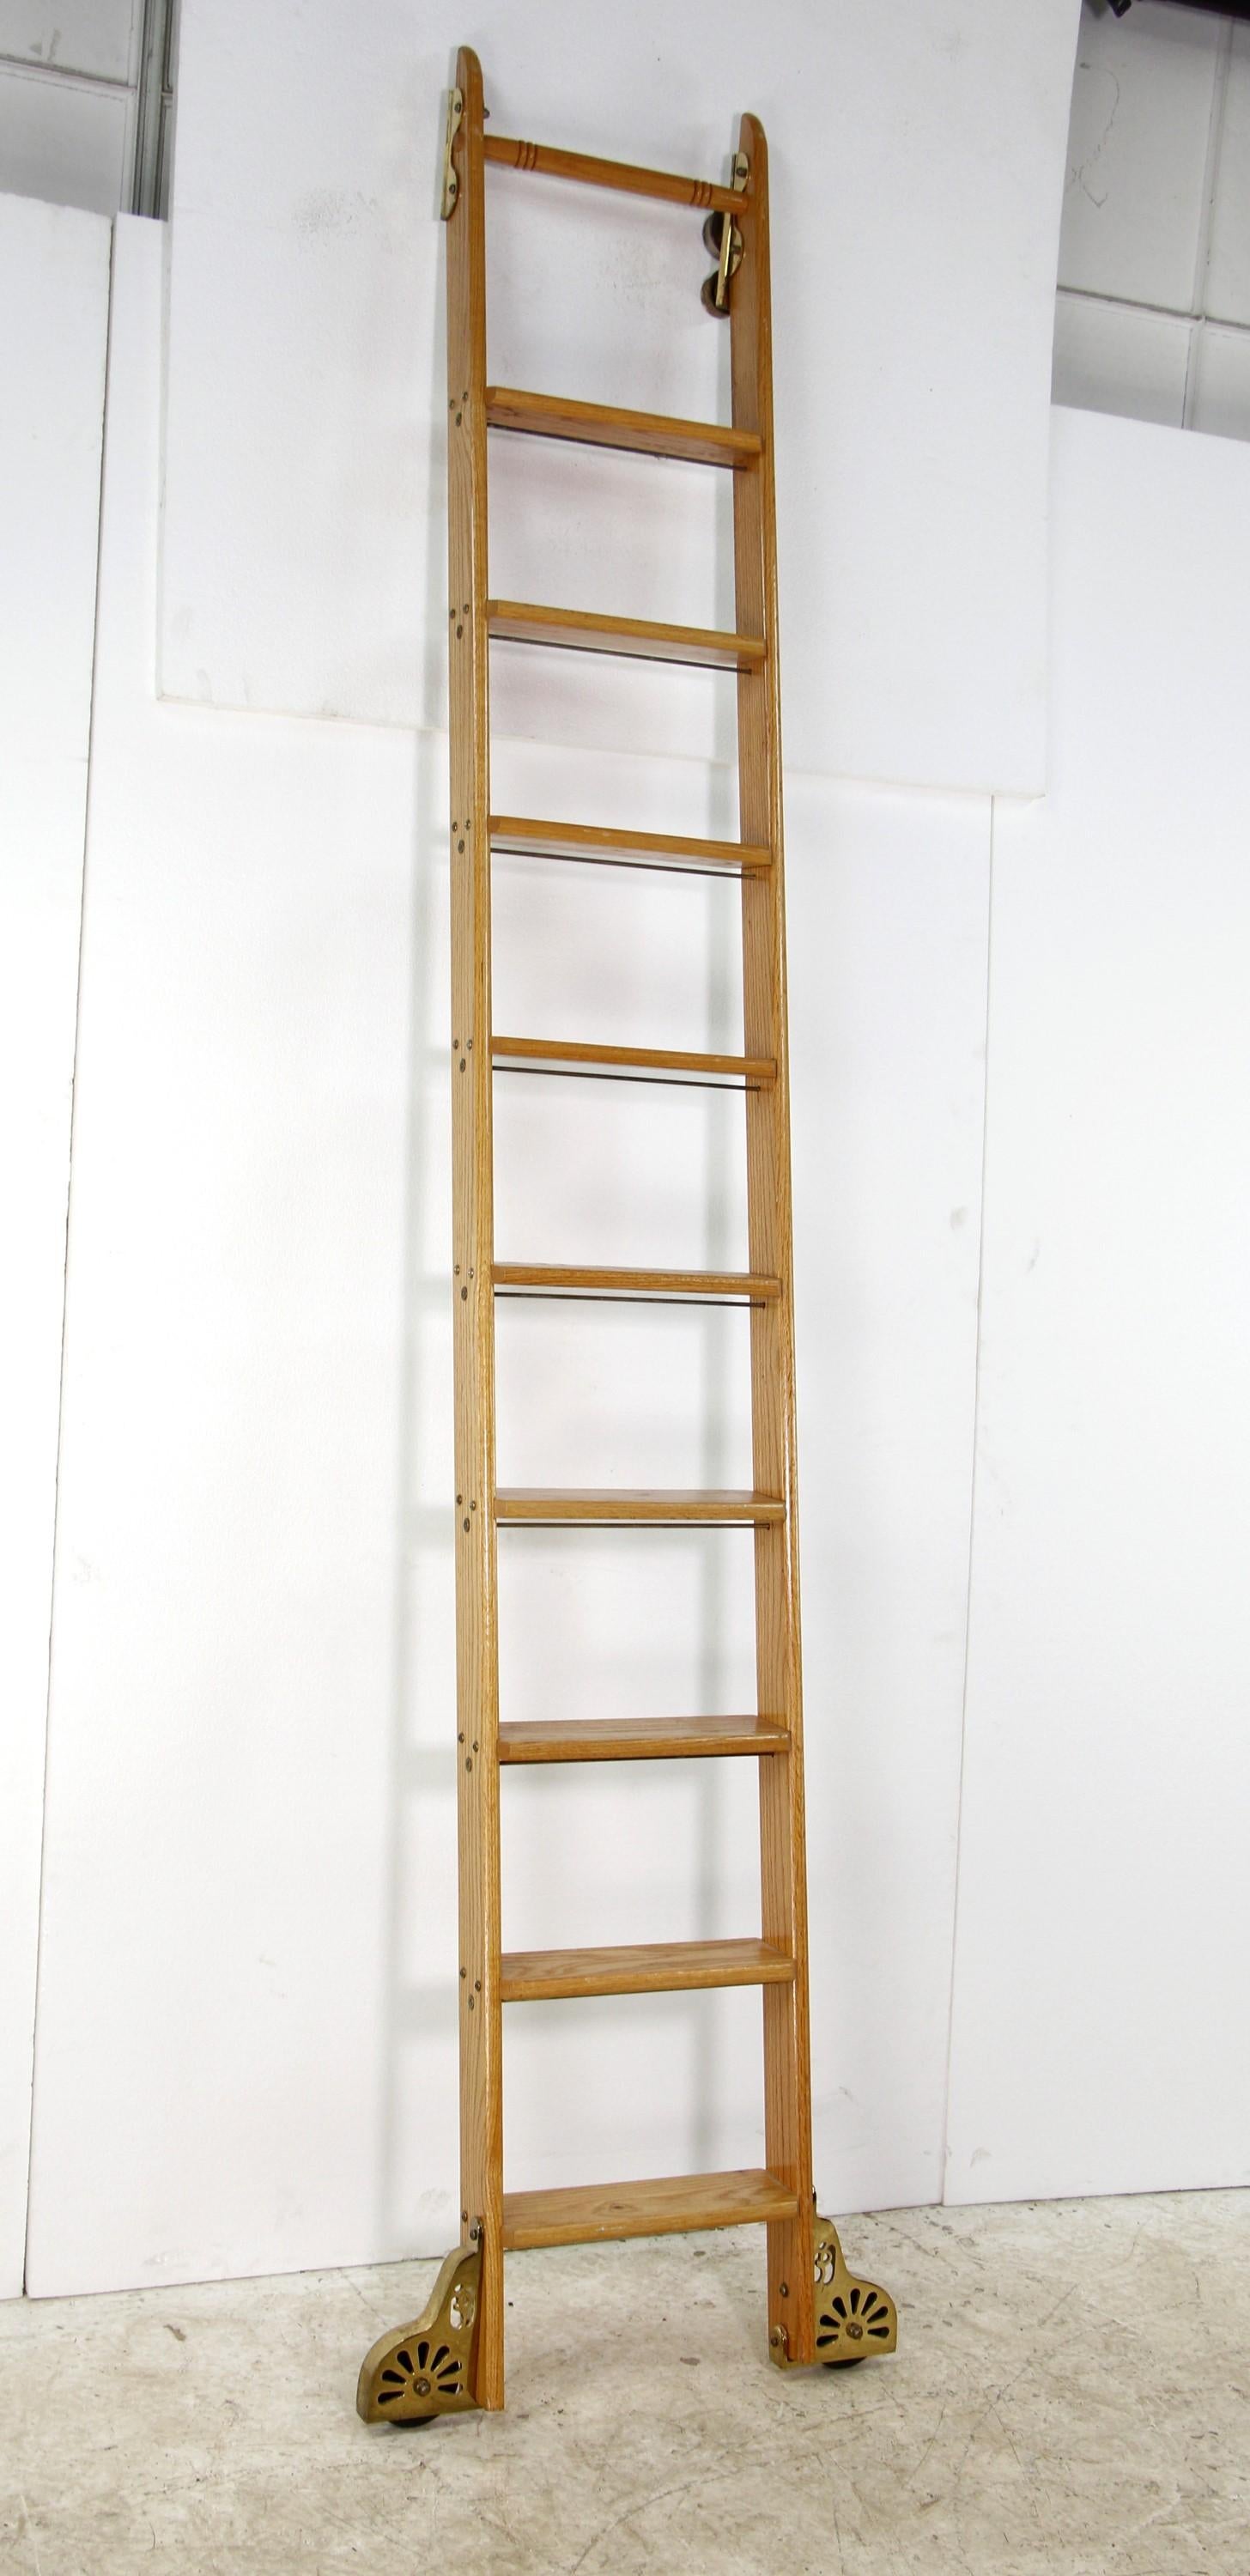 Mid-20th Century oak library ladder in a light stain. Features brass plated steel hardware and rolling wheels. Missing one set of top rolling wheels. Made by Putnam Rolling Ladder Co., Inc.